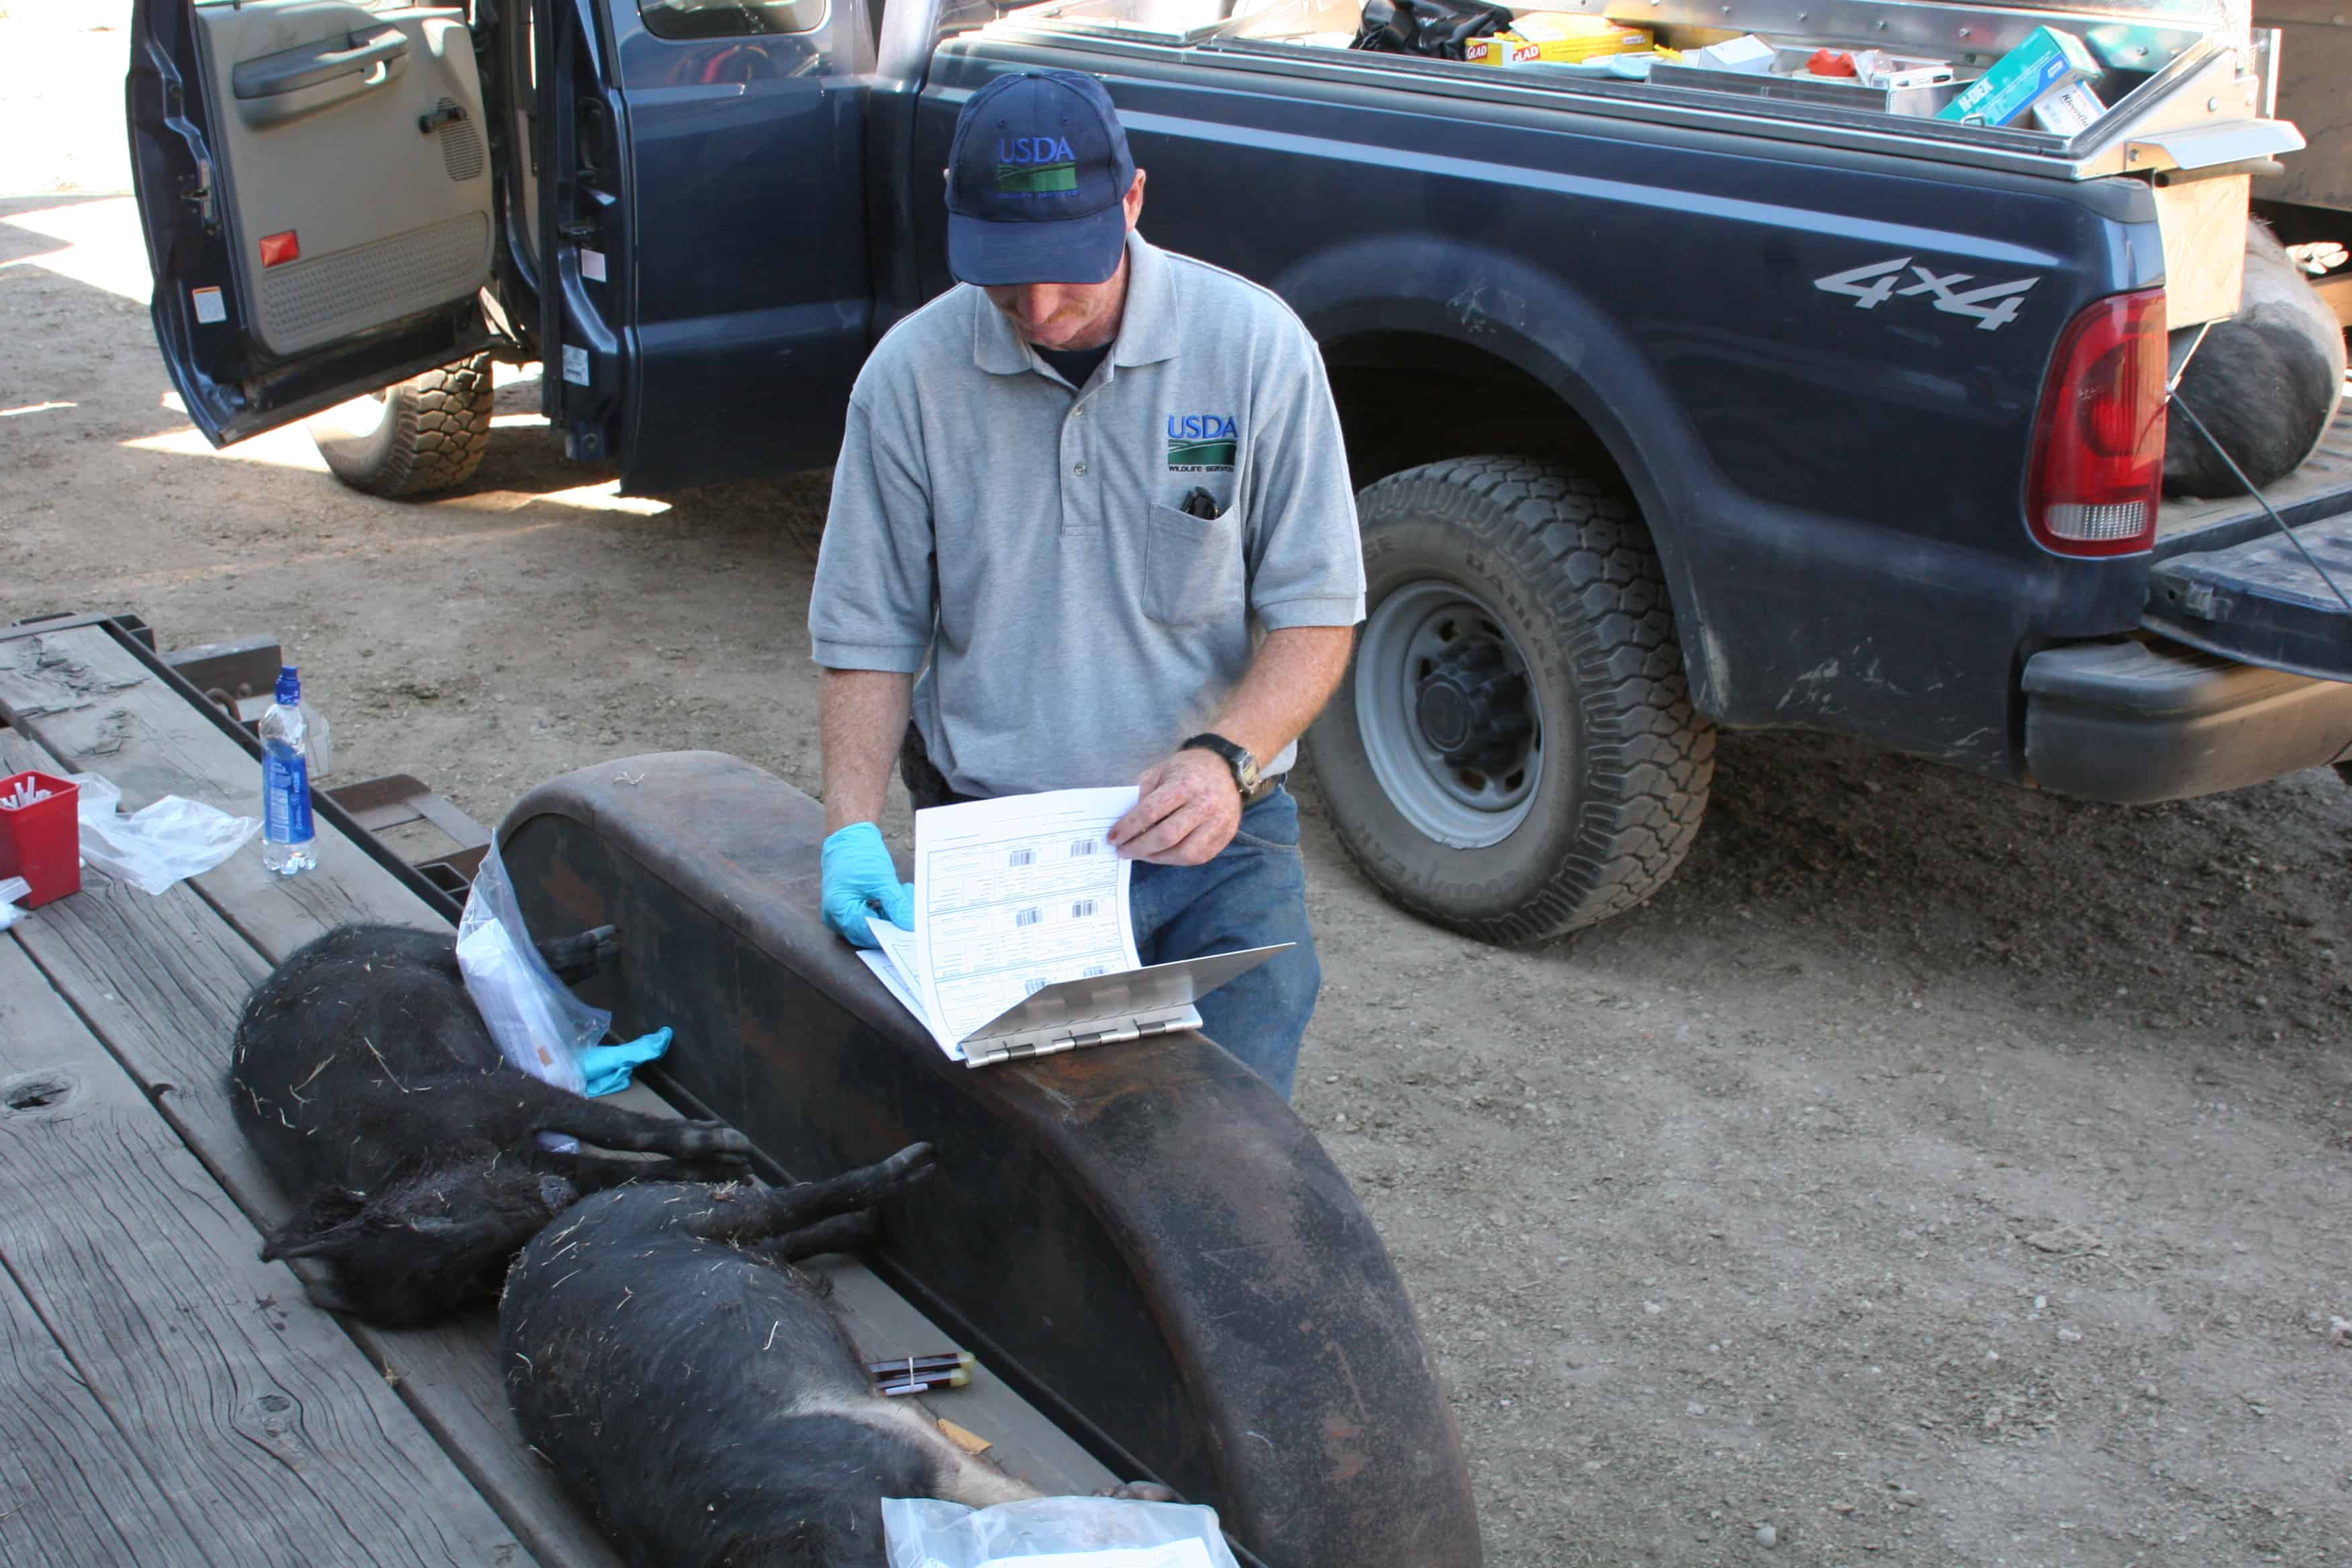 As part of USDA Wildlife Services’ feral swine operational and disease surveillance efforts, its biologists collect feral swine hair samples for the genetic archive. ©USDA Wildlife Services